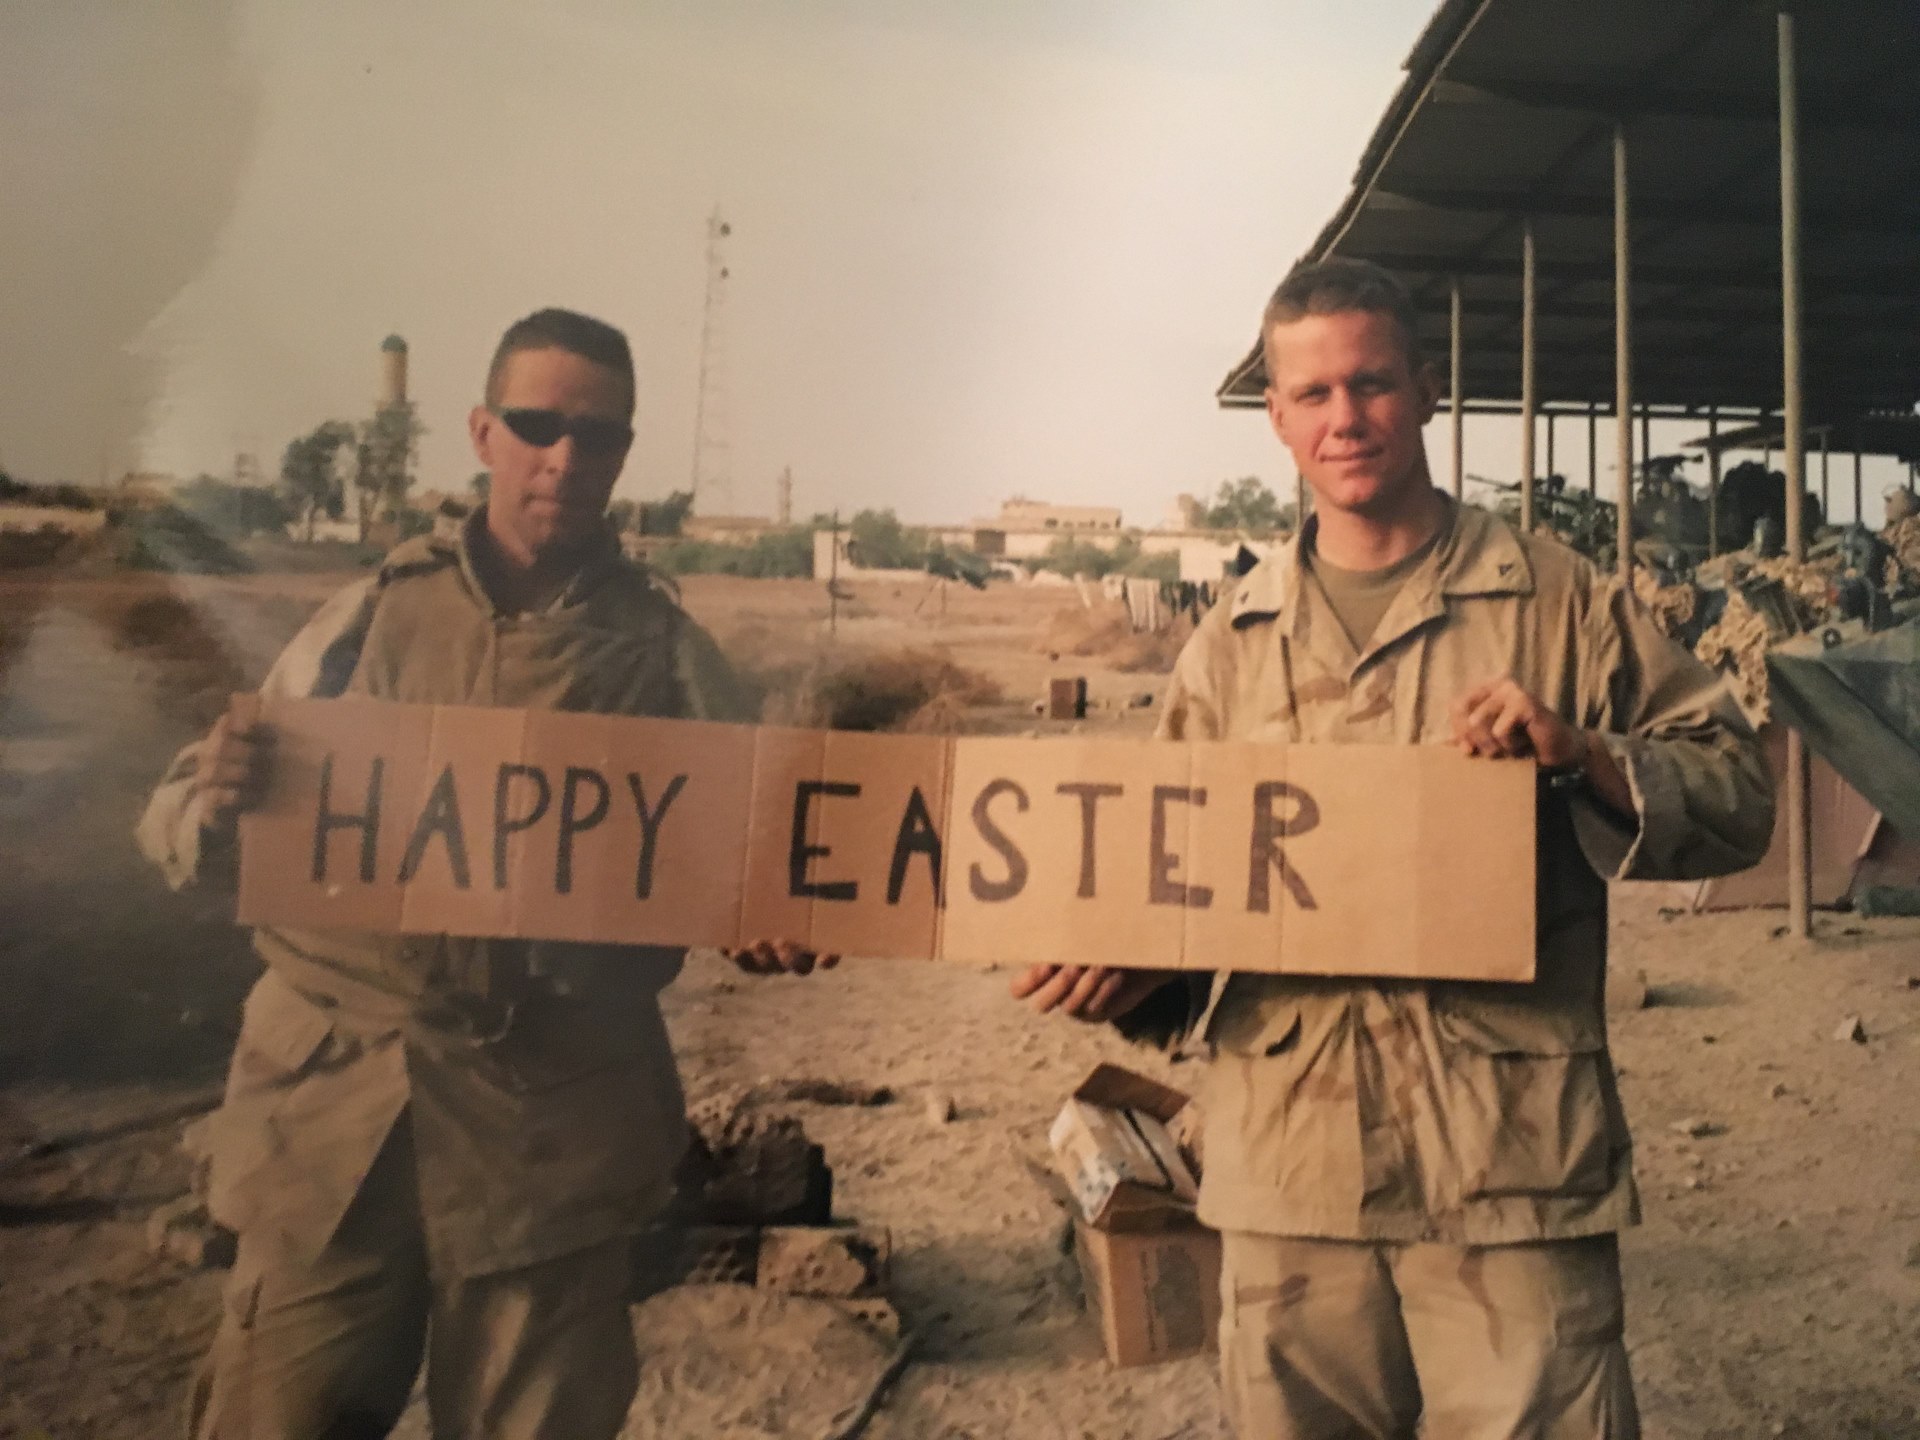 Two men in military uniform holding a "Happy Easter" sign